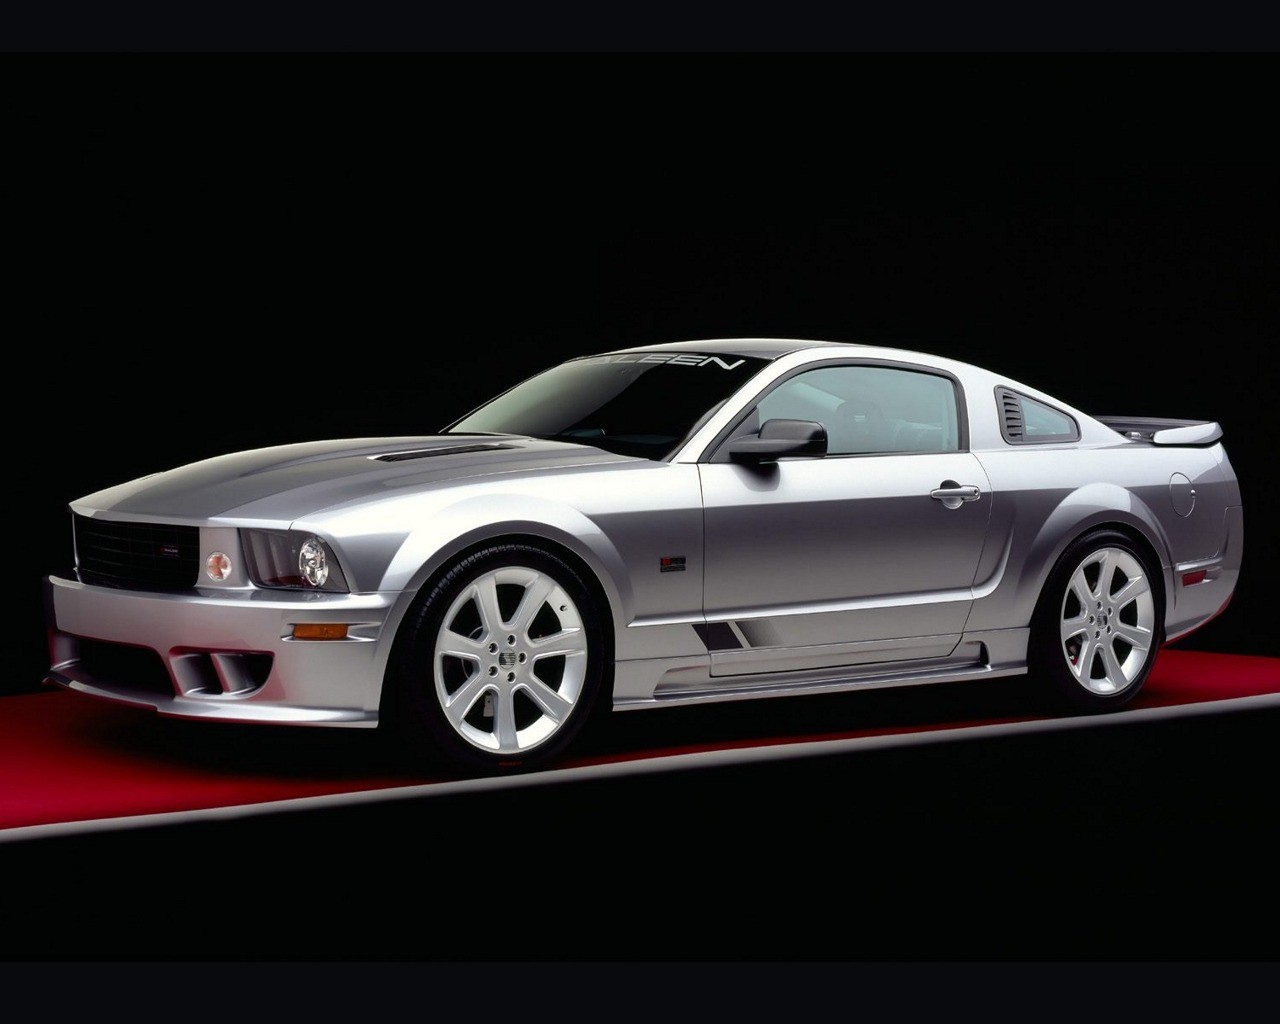 General 1280x1024 car vehicle Saleen silver cars Ford Mustang Ford Ford Mustang S-197 muscle cars American cars